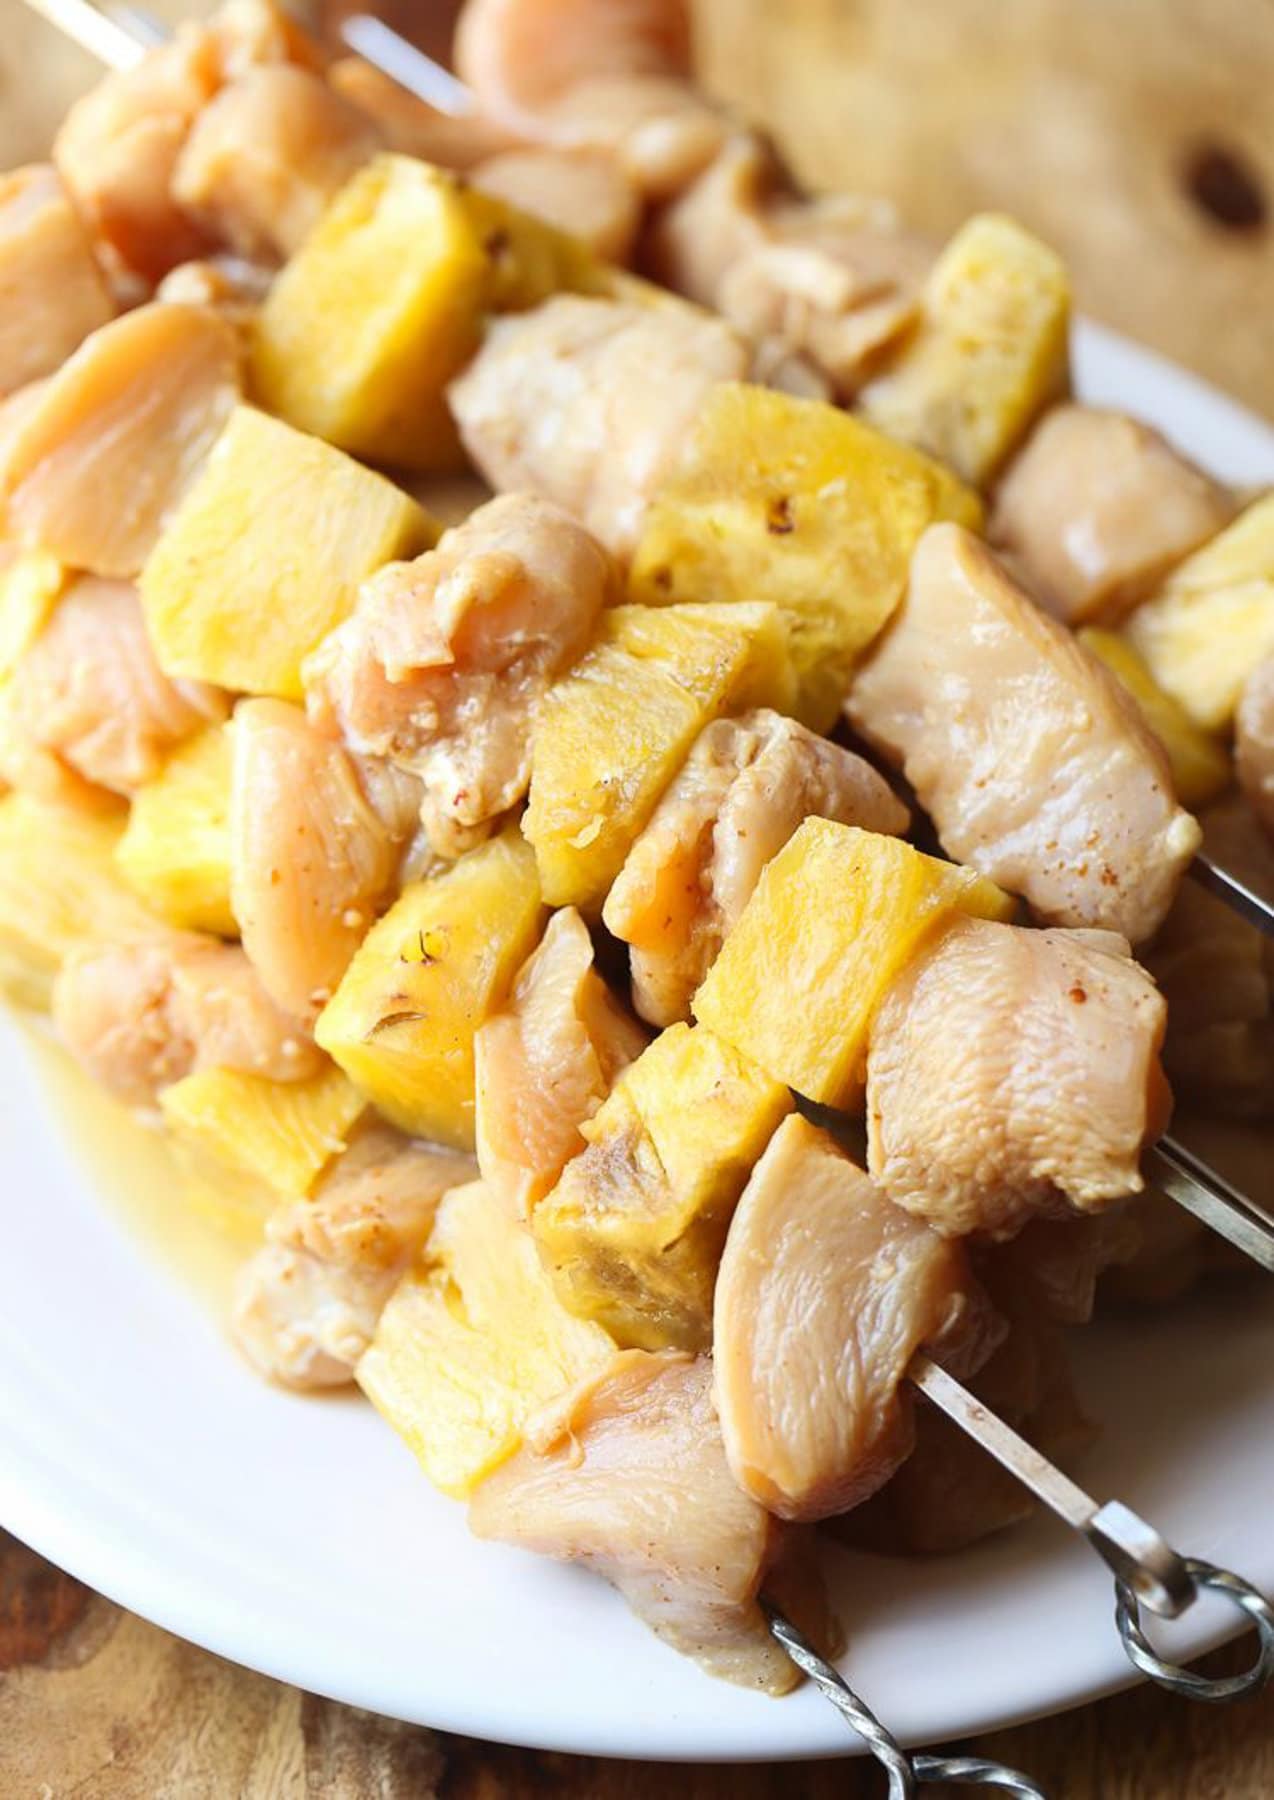 Raw chicken and pineapple on a skewer